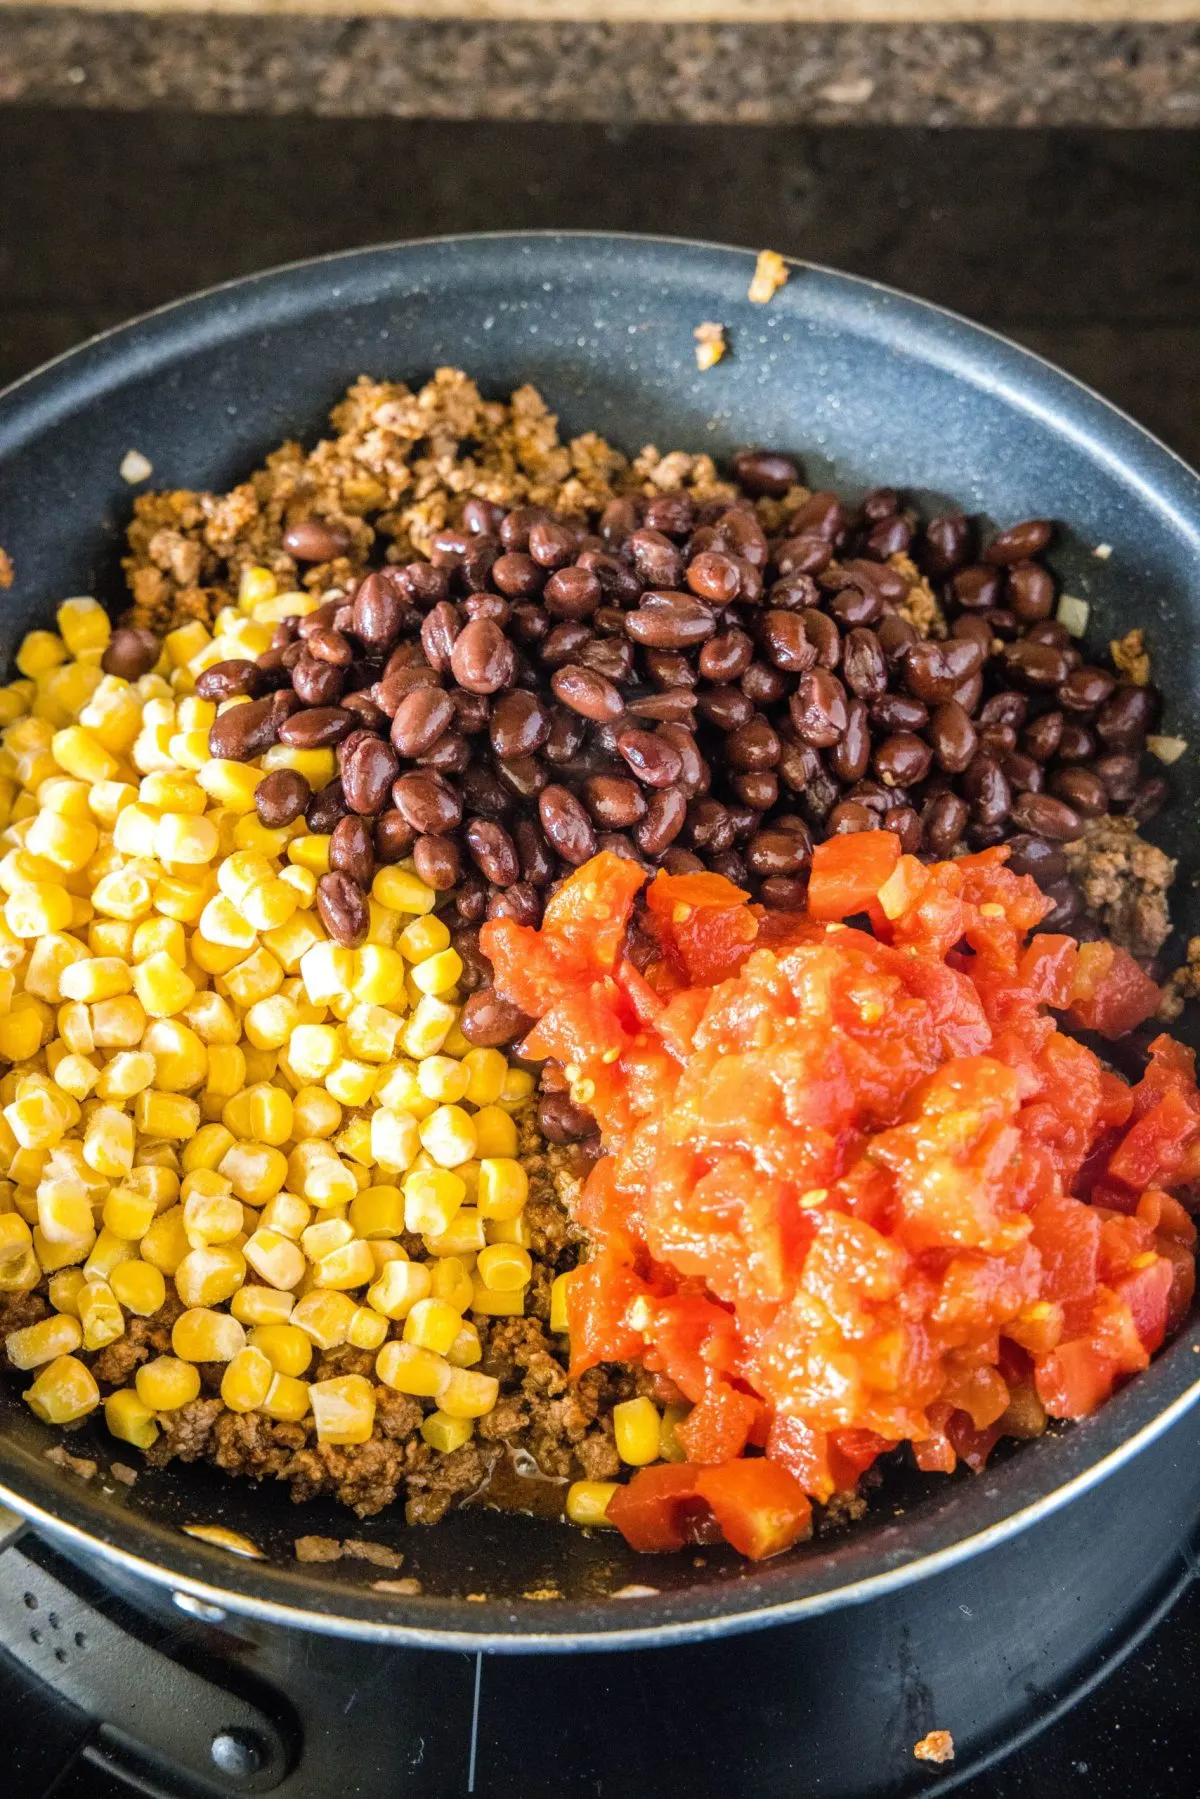 Corn, black beans, and salsa in a skillet on top of ground beef and onions